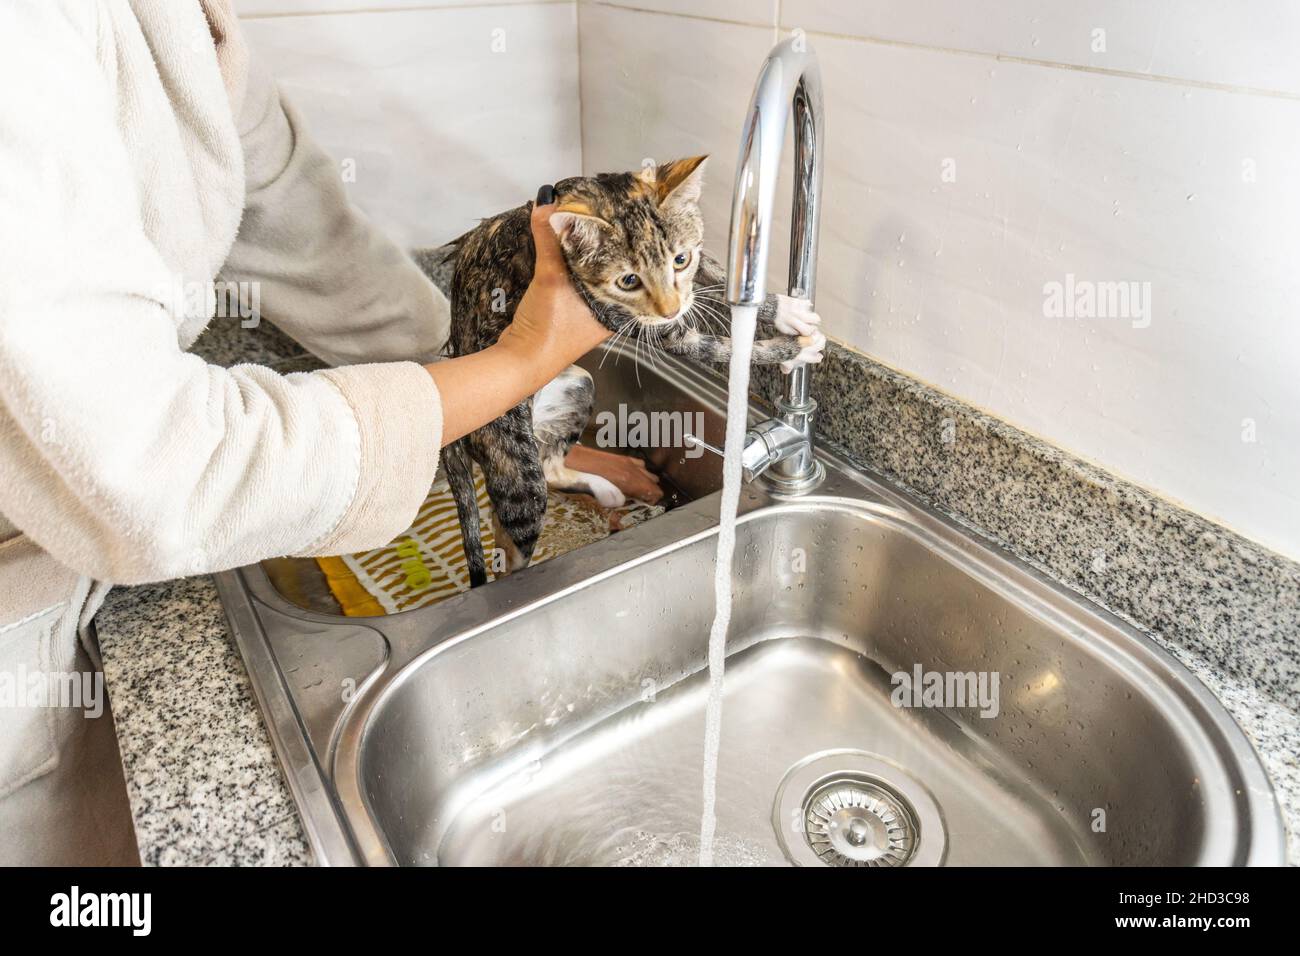 Hands of an unrecognizable person bathing a gray cat in the kitchen dishwasher Stock Photo